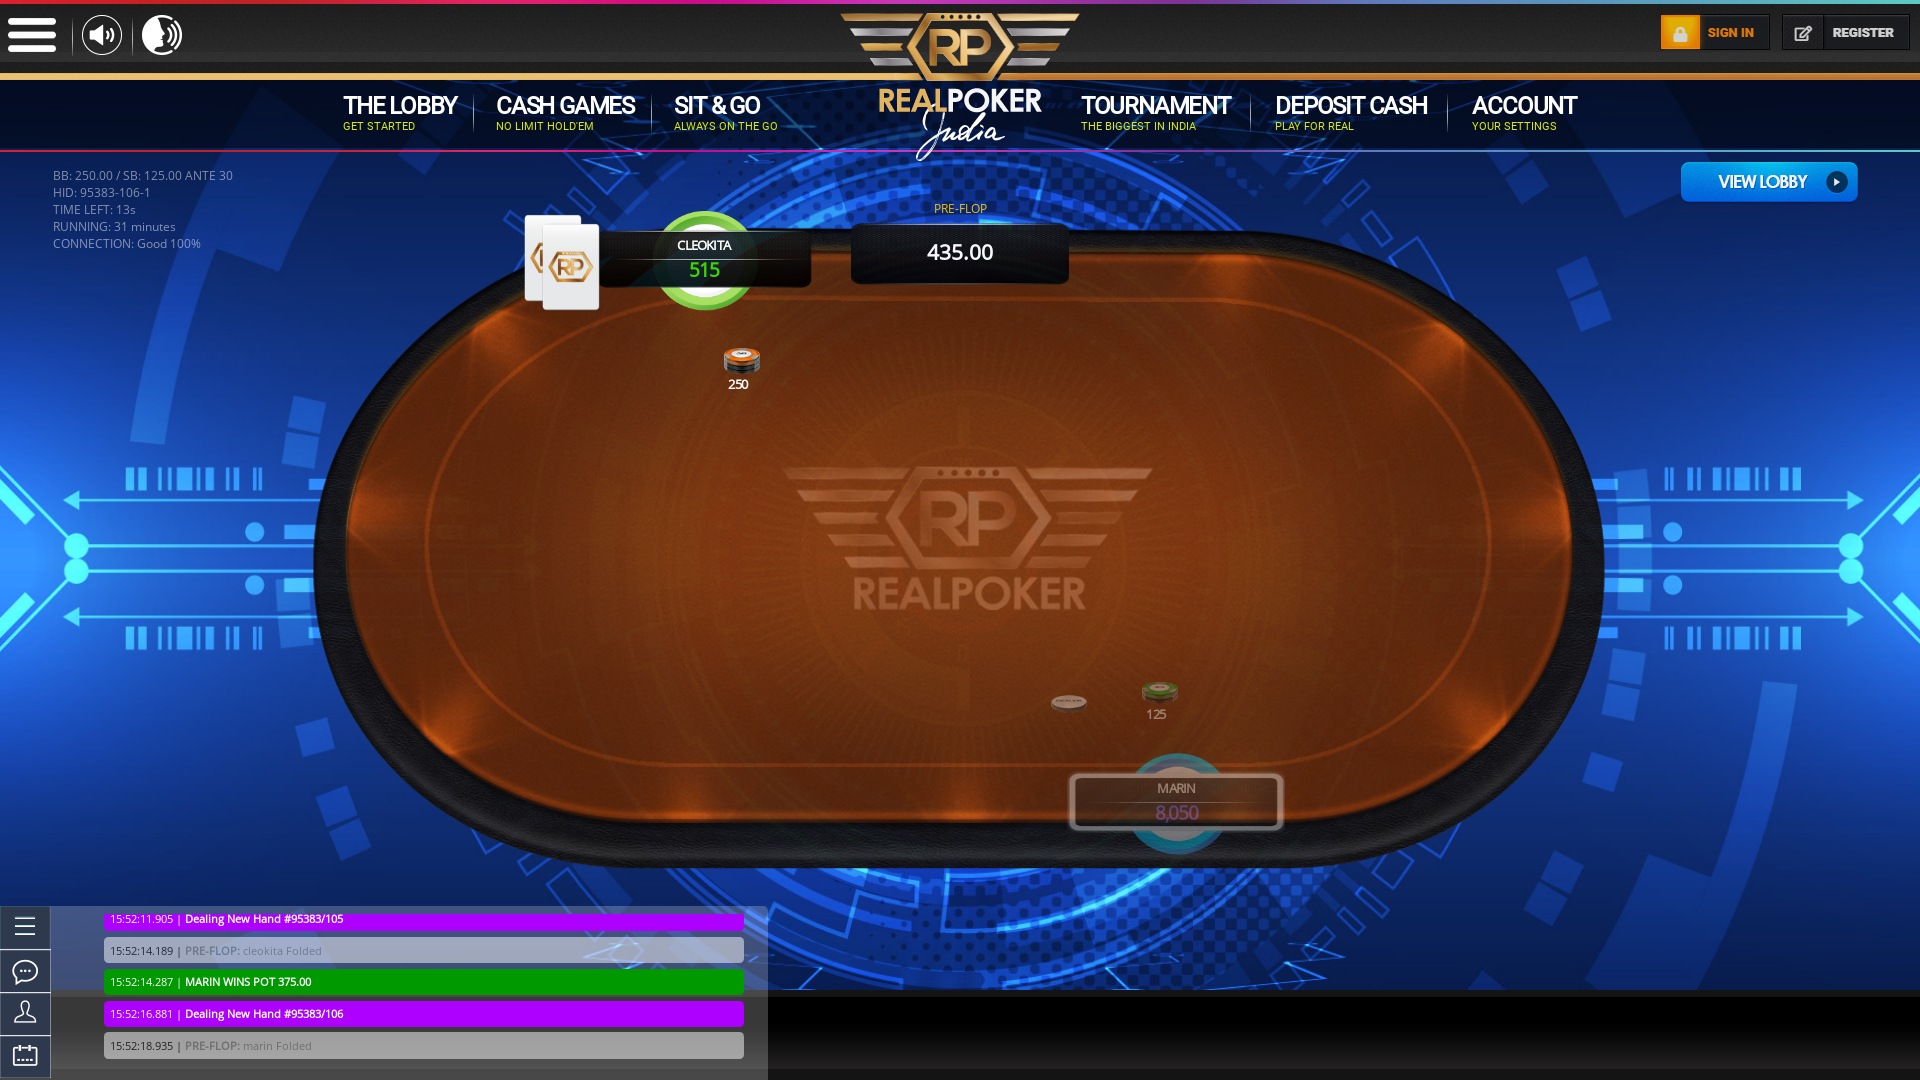 Online poker on a 6 player table in the 31st minute match up